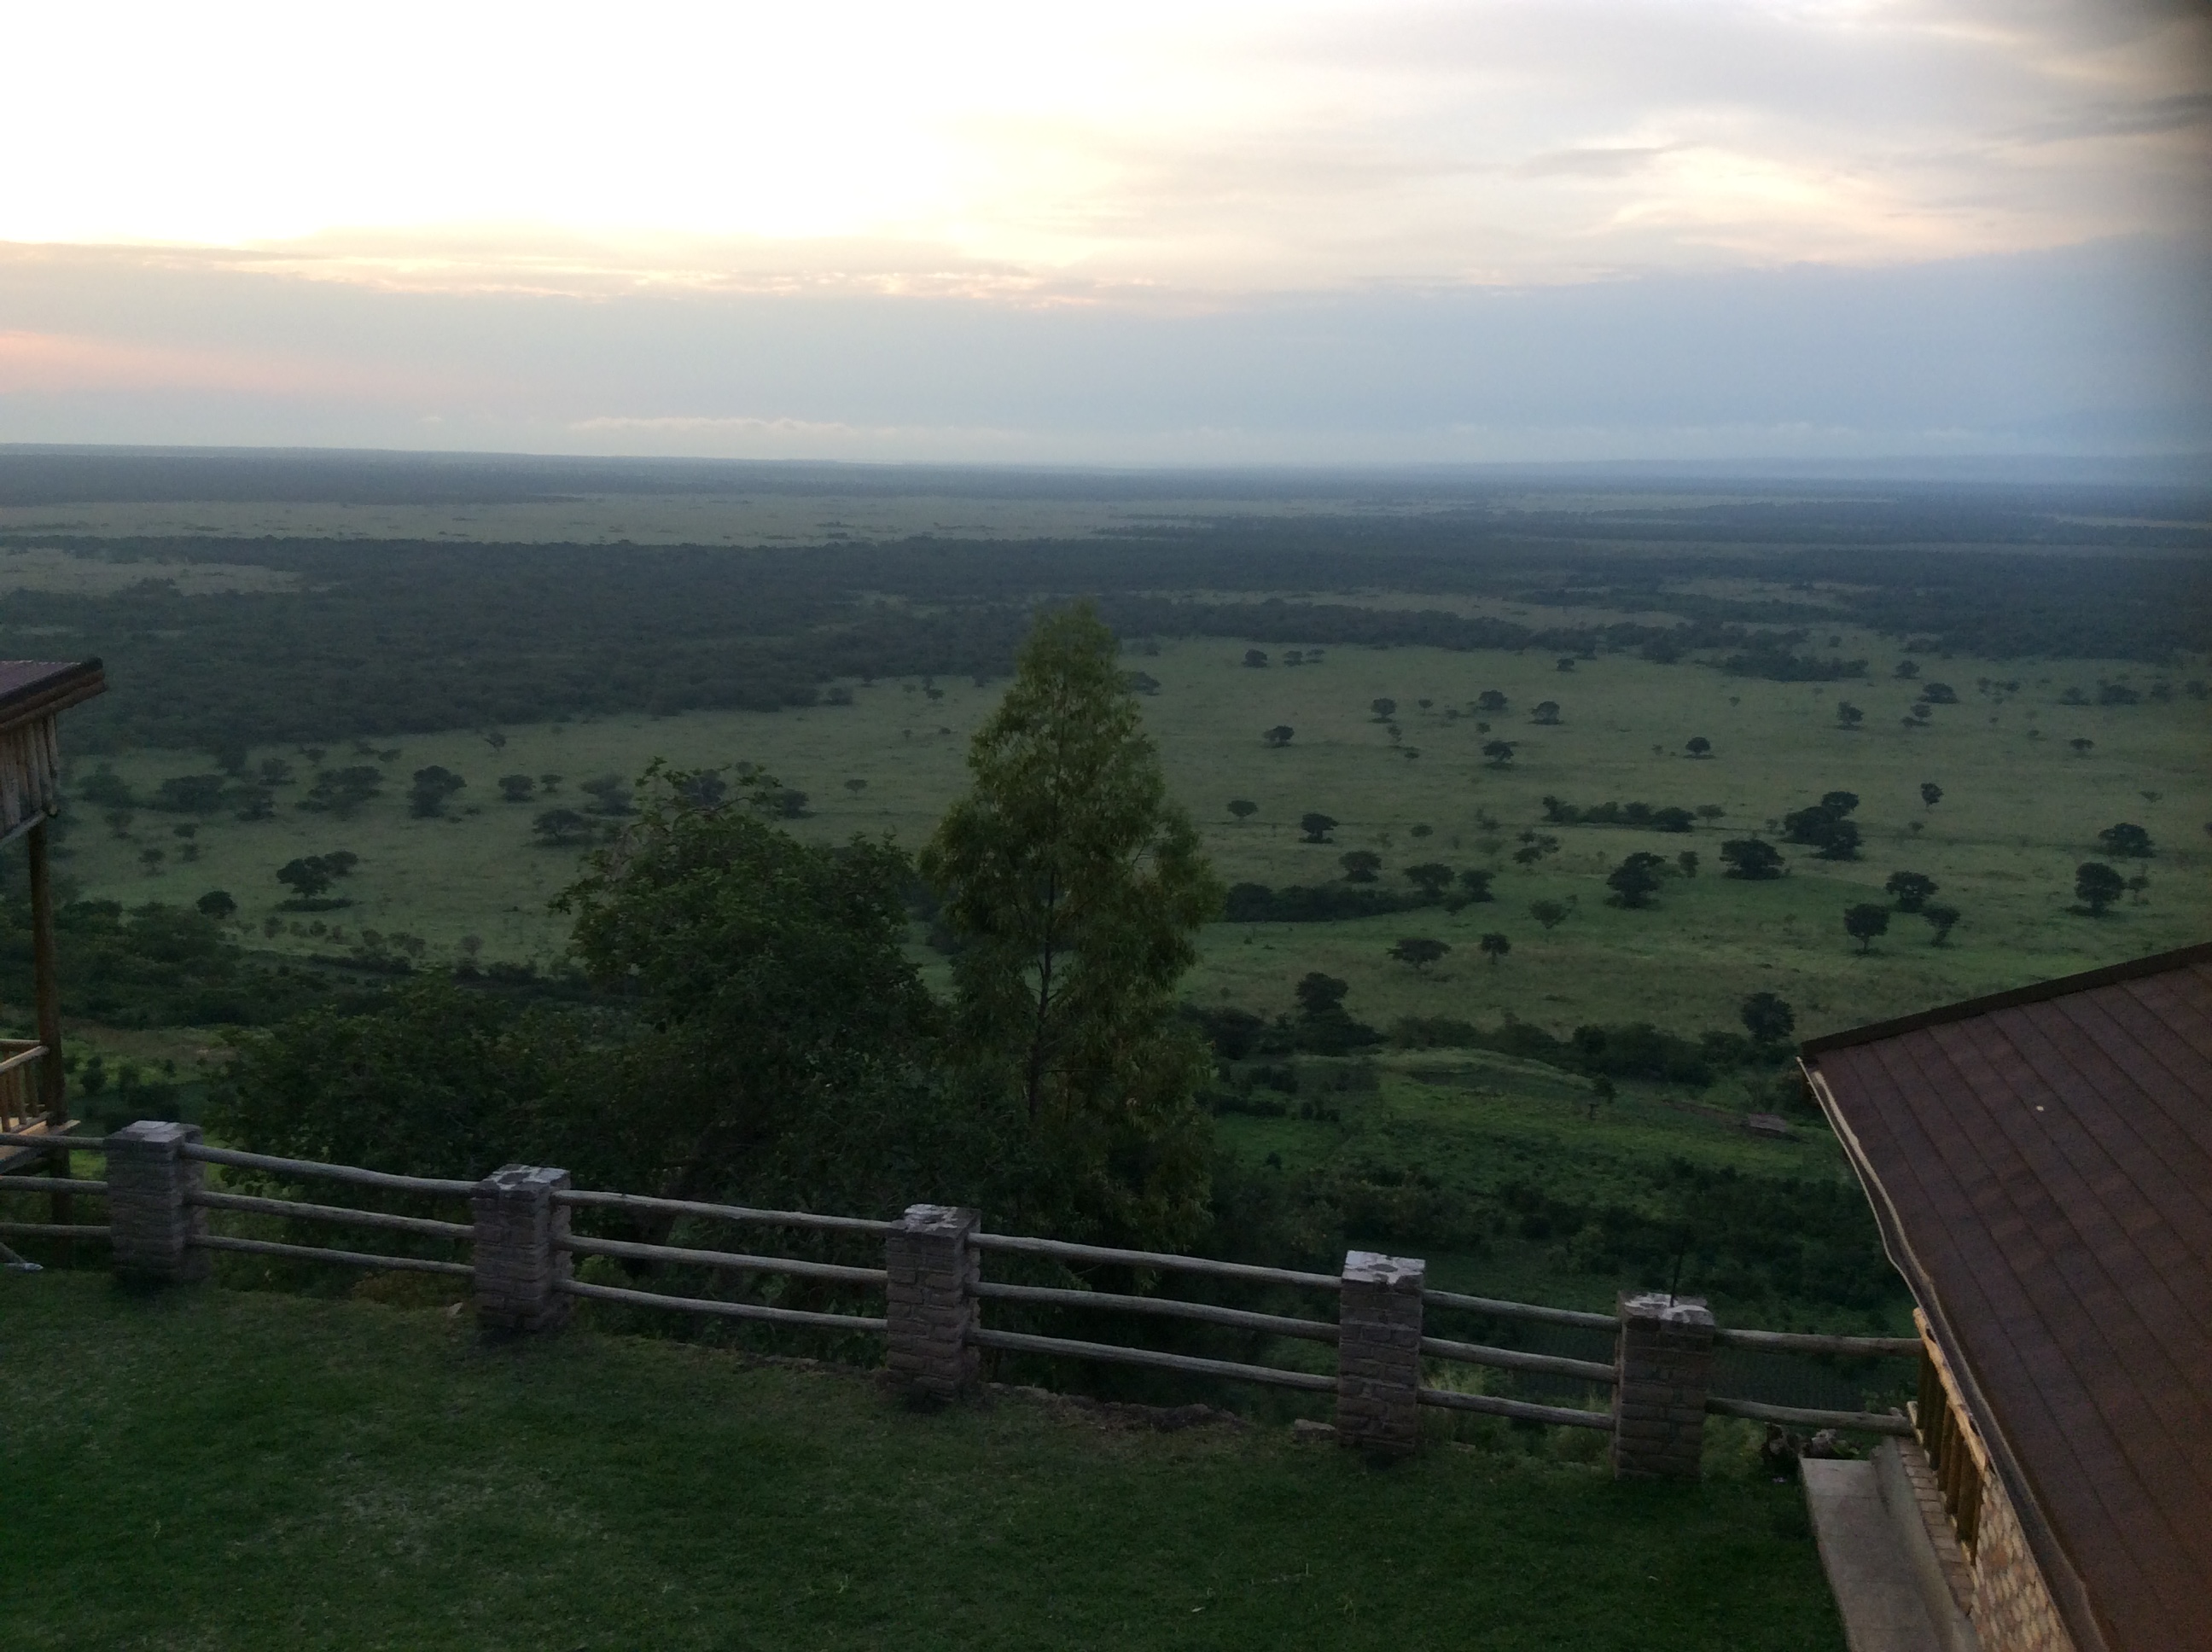 Queen Elizabeth National Game Park as viewed from the Lodge